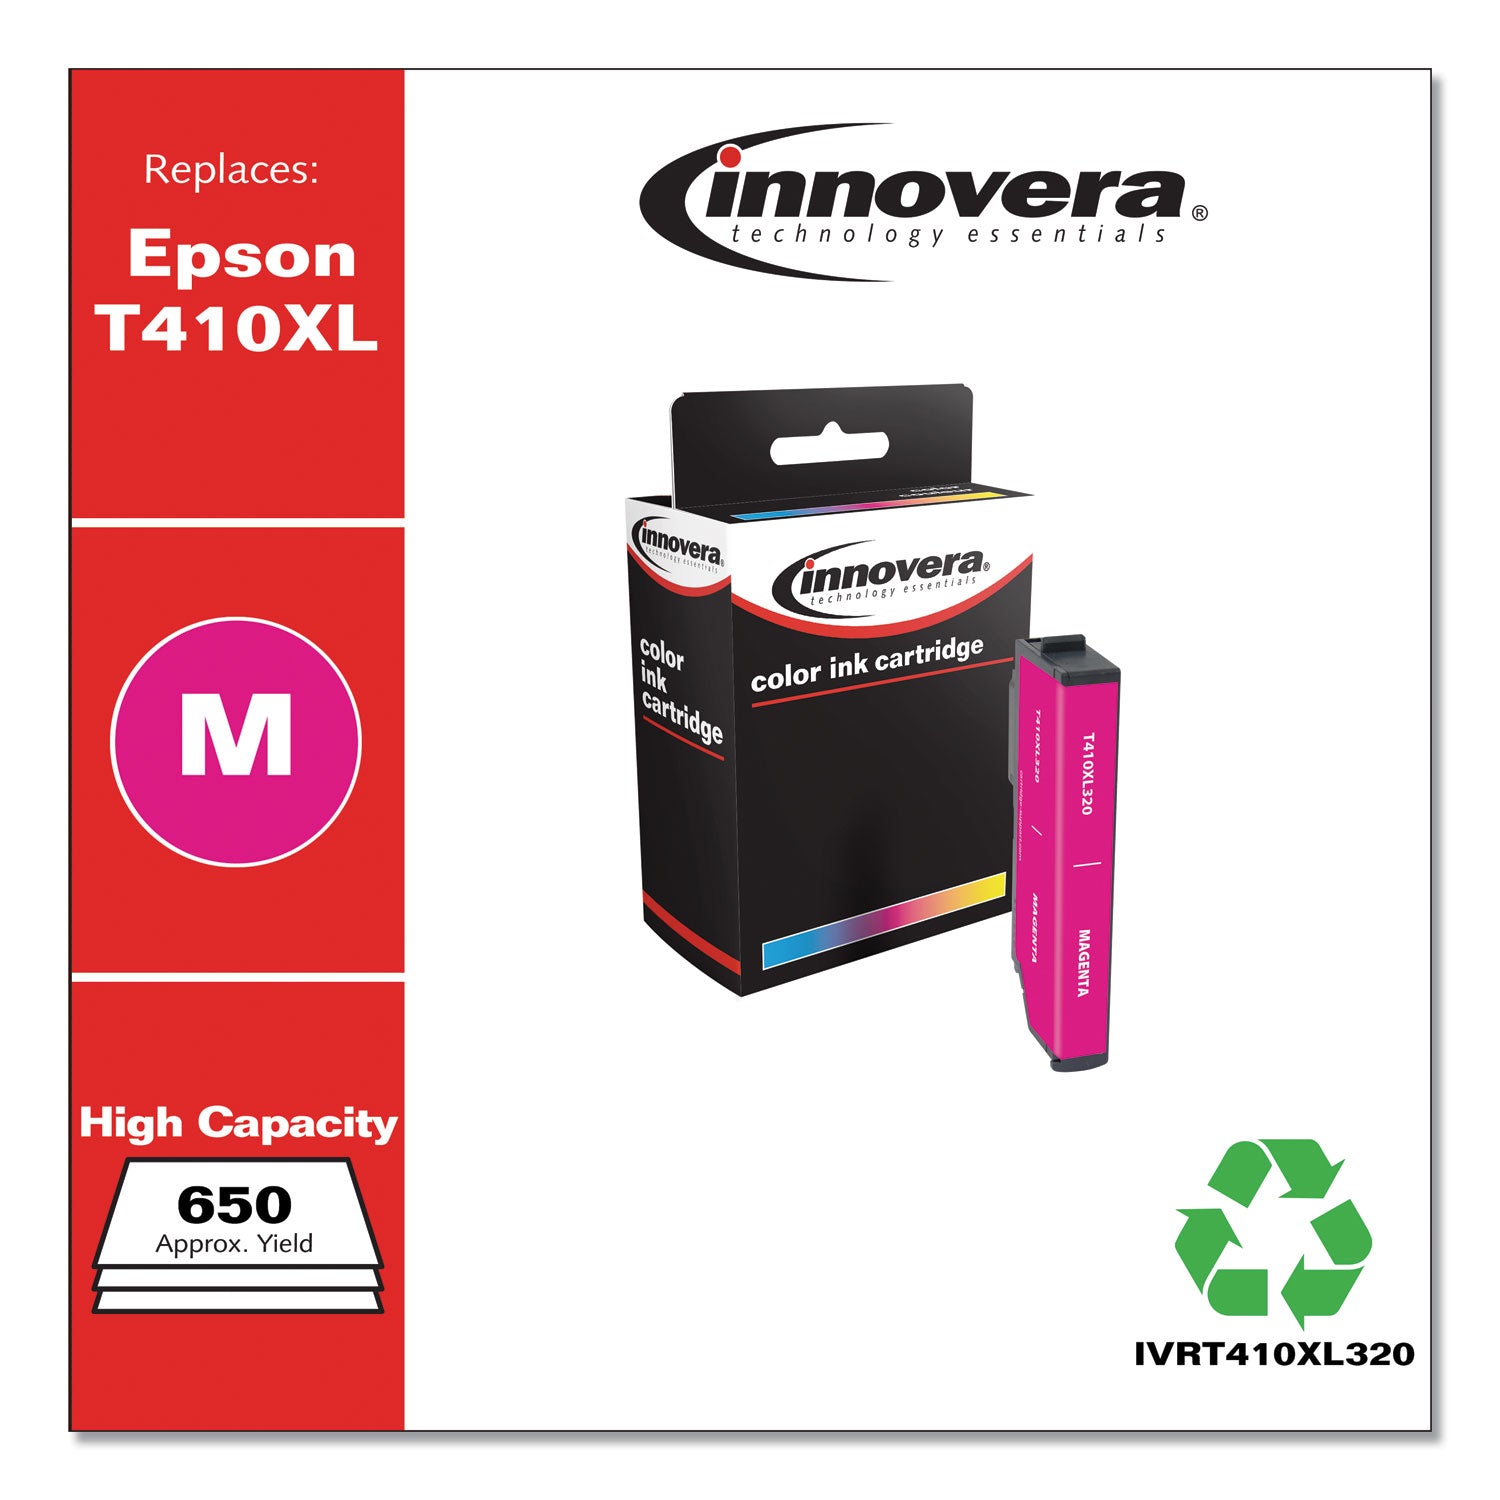 remanufactured-magenta-high-yield-ink-replacement-for-t410xl-t410xl320-650-page-yield_ivrt410xl320 - 2